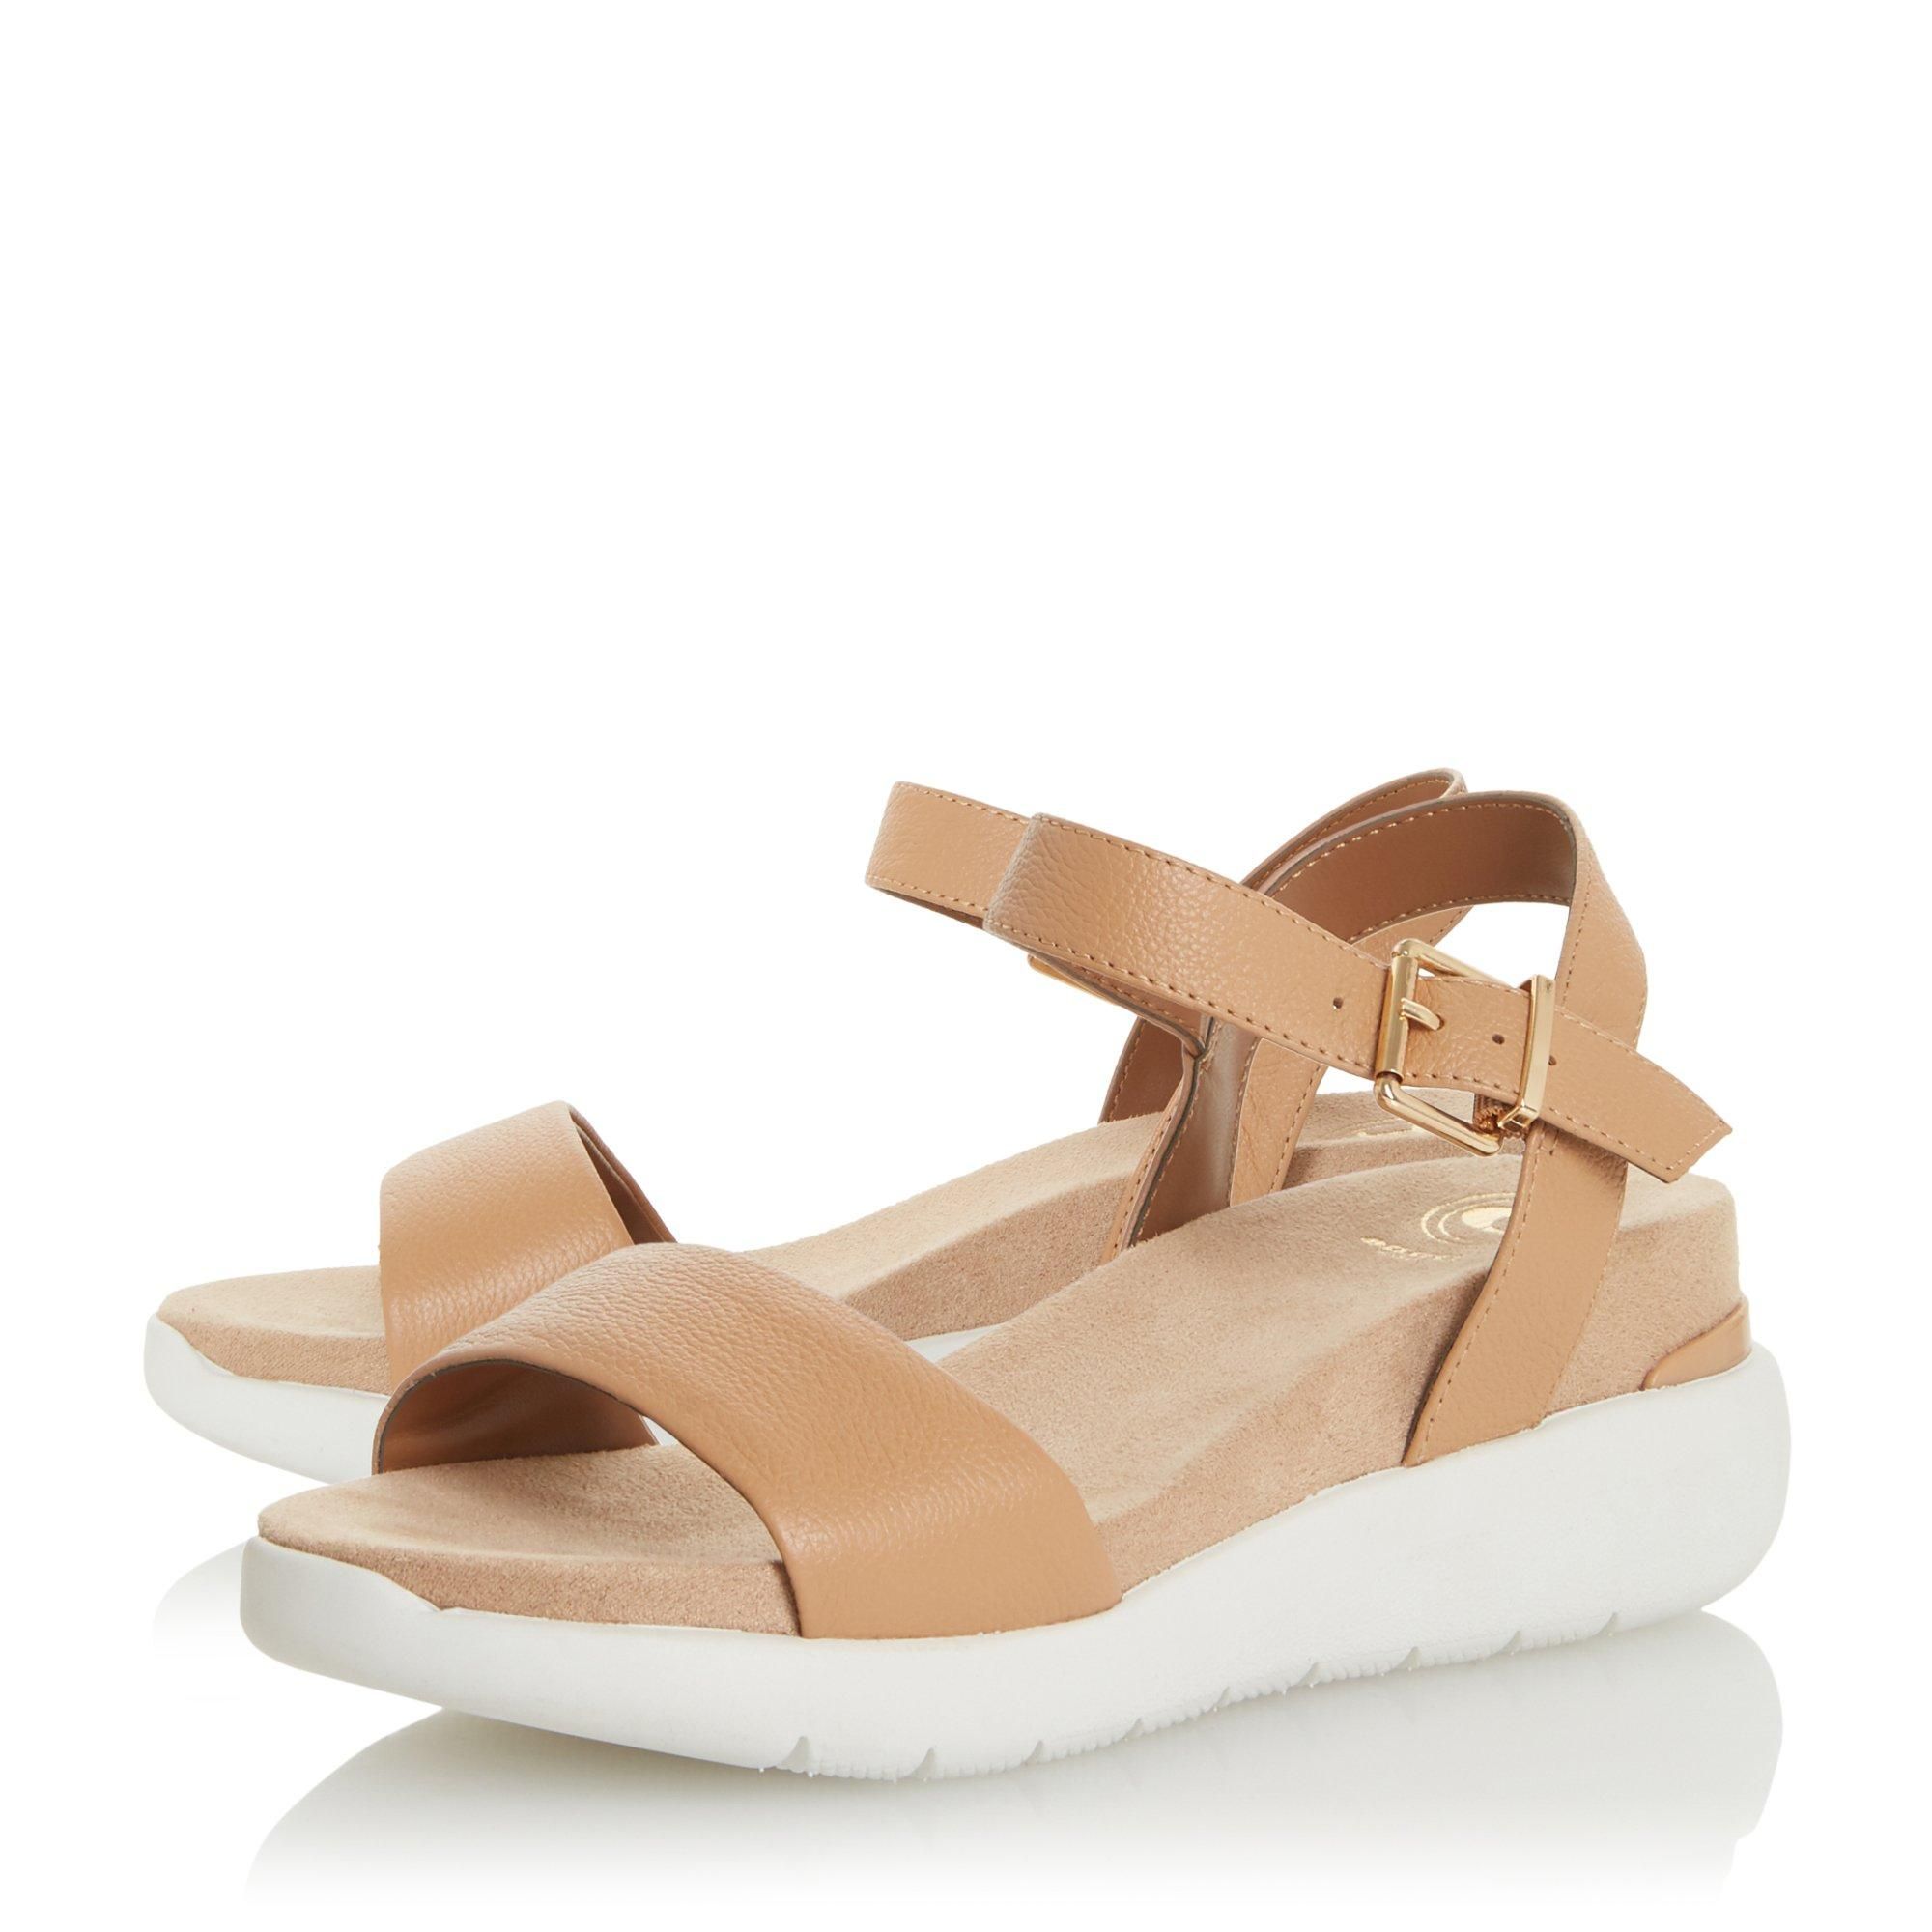 Upgrade your everyday summer style with this sandal from Dune London. Resting on a contrasting flatform heel for a modern finishing touch. It works textured straps and is secured with an ankle buckle fastening.